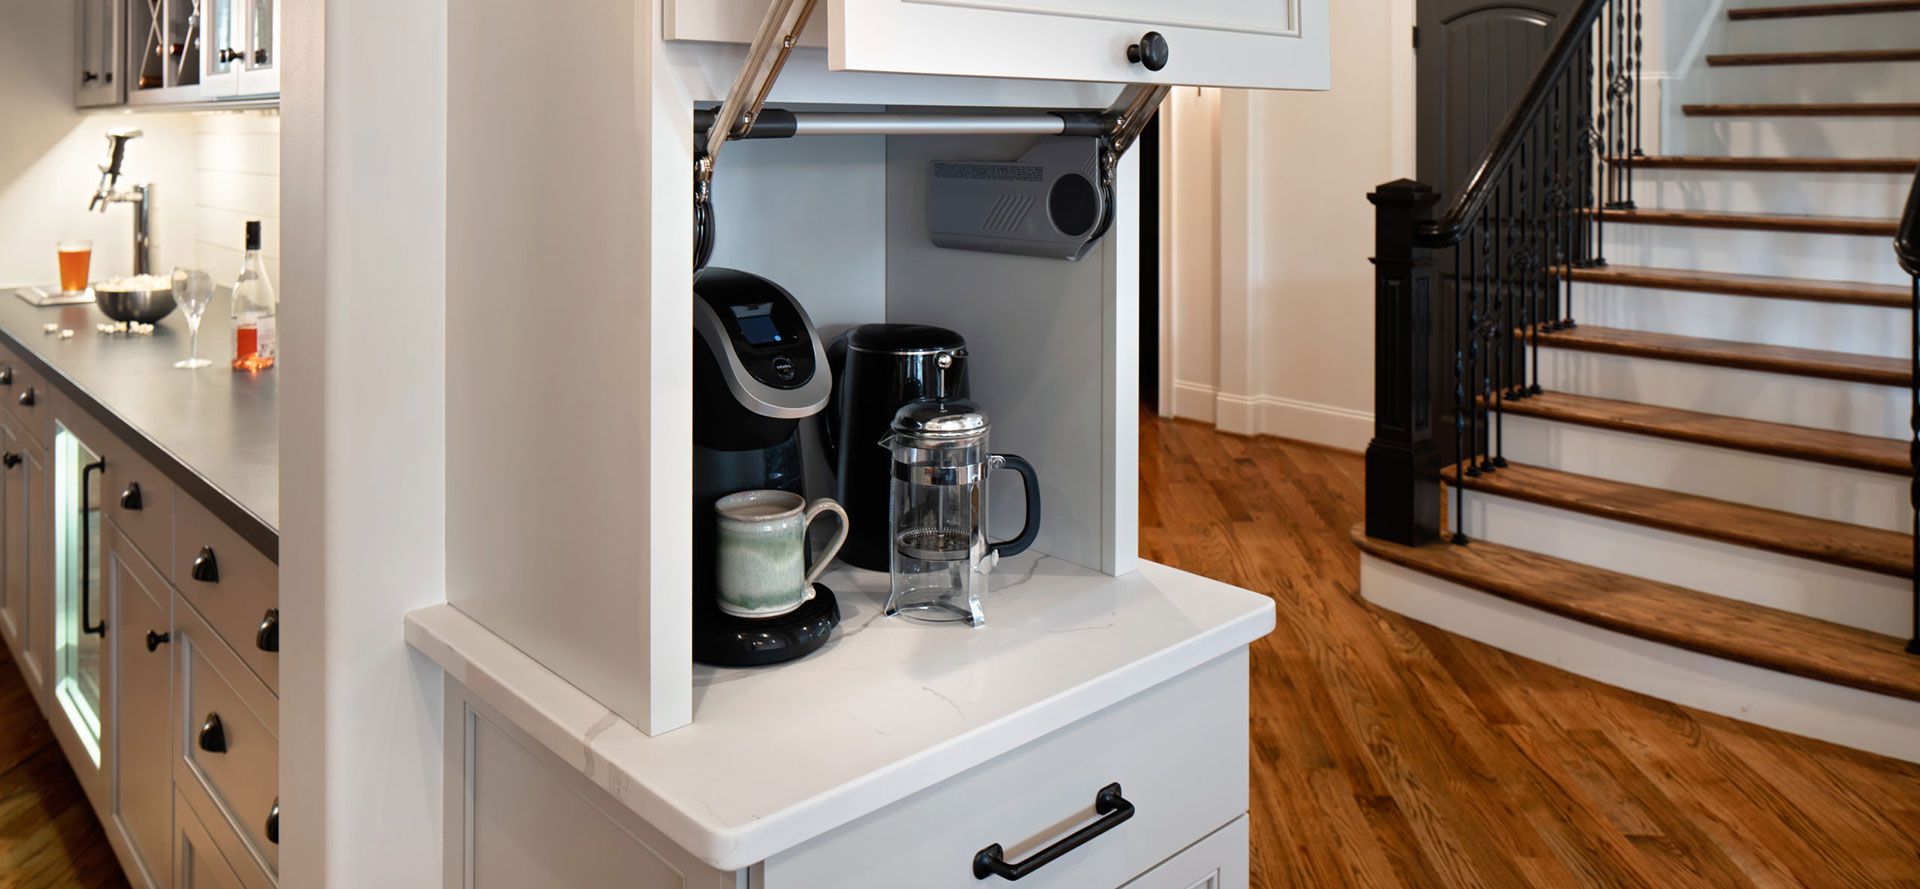 Best Place To Install A Coffee Station.